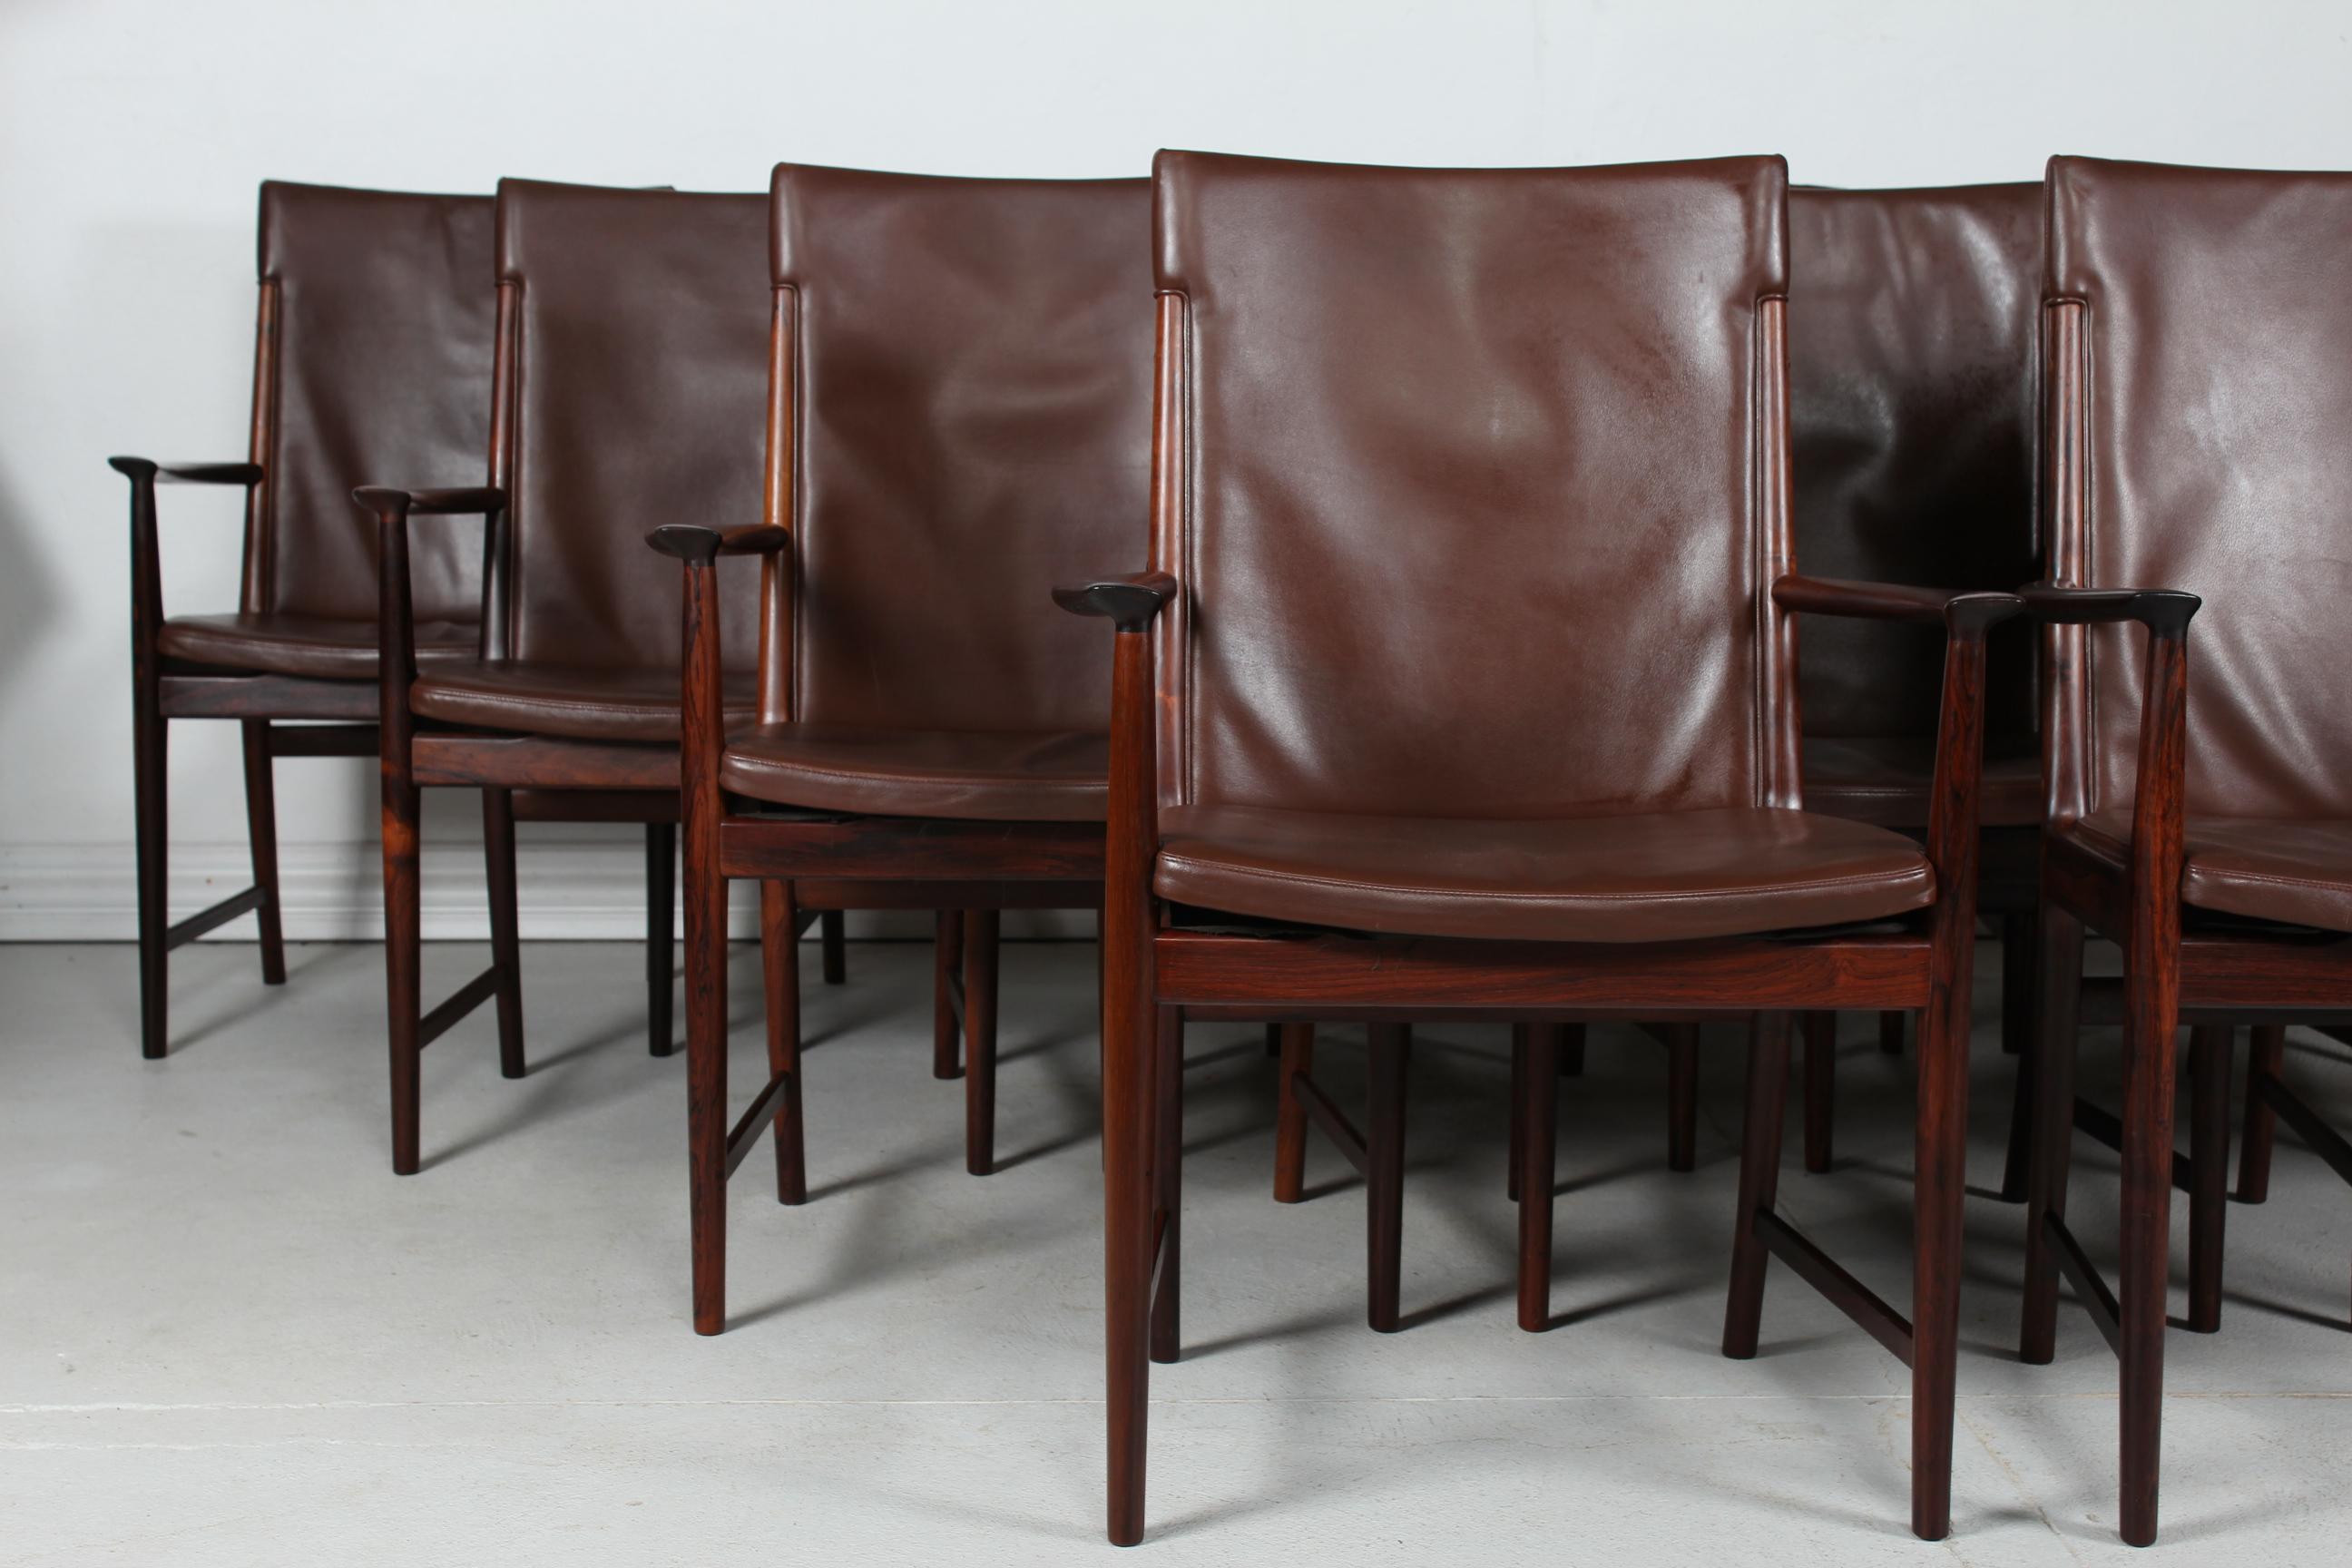 Here is a rare set of 14 high conference chairs from the 1960s designed by the Danish furniture designer Kai Lyngfeldt Larsen.
They are made of rosewood with dark brown leather upholstery
in Denmark by furniture maker Søren Willadsen

Very nice